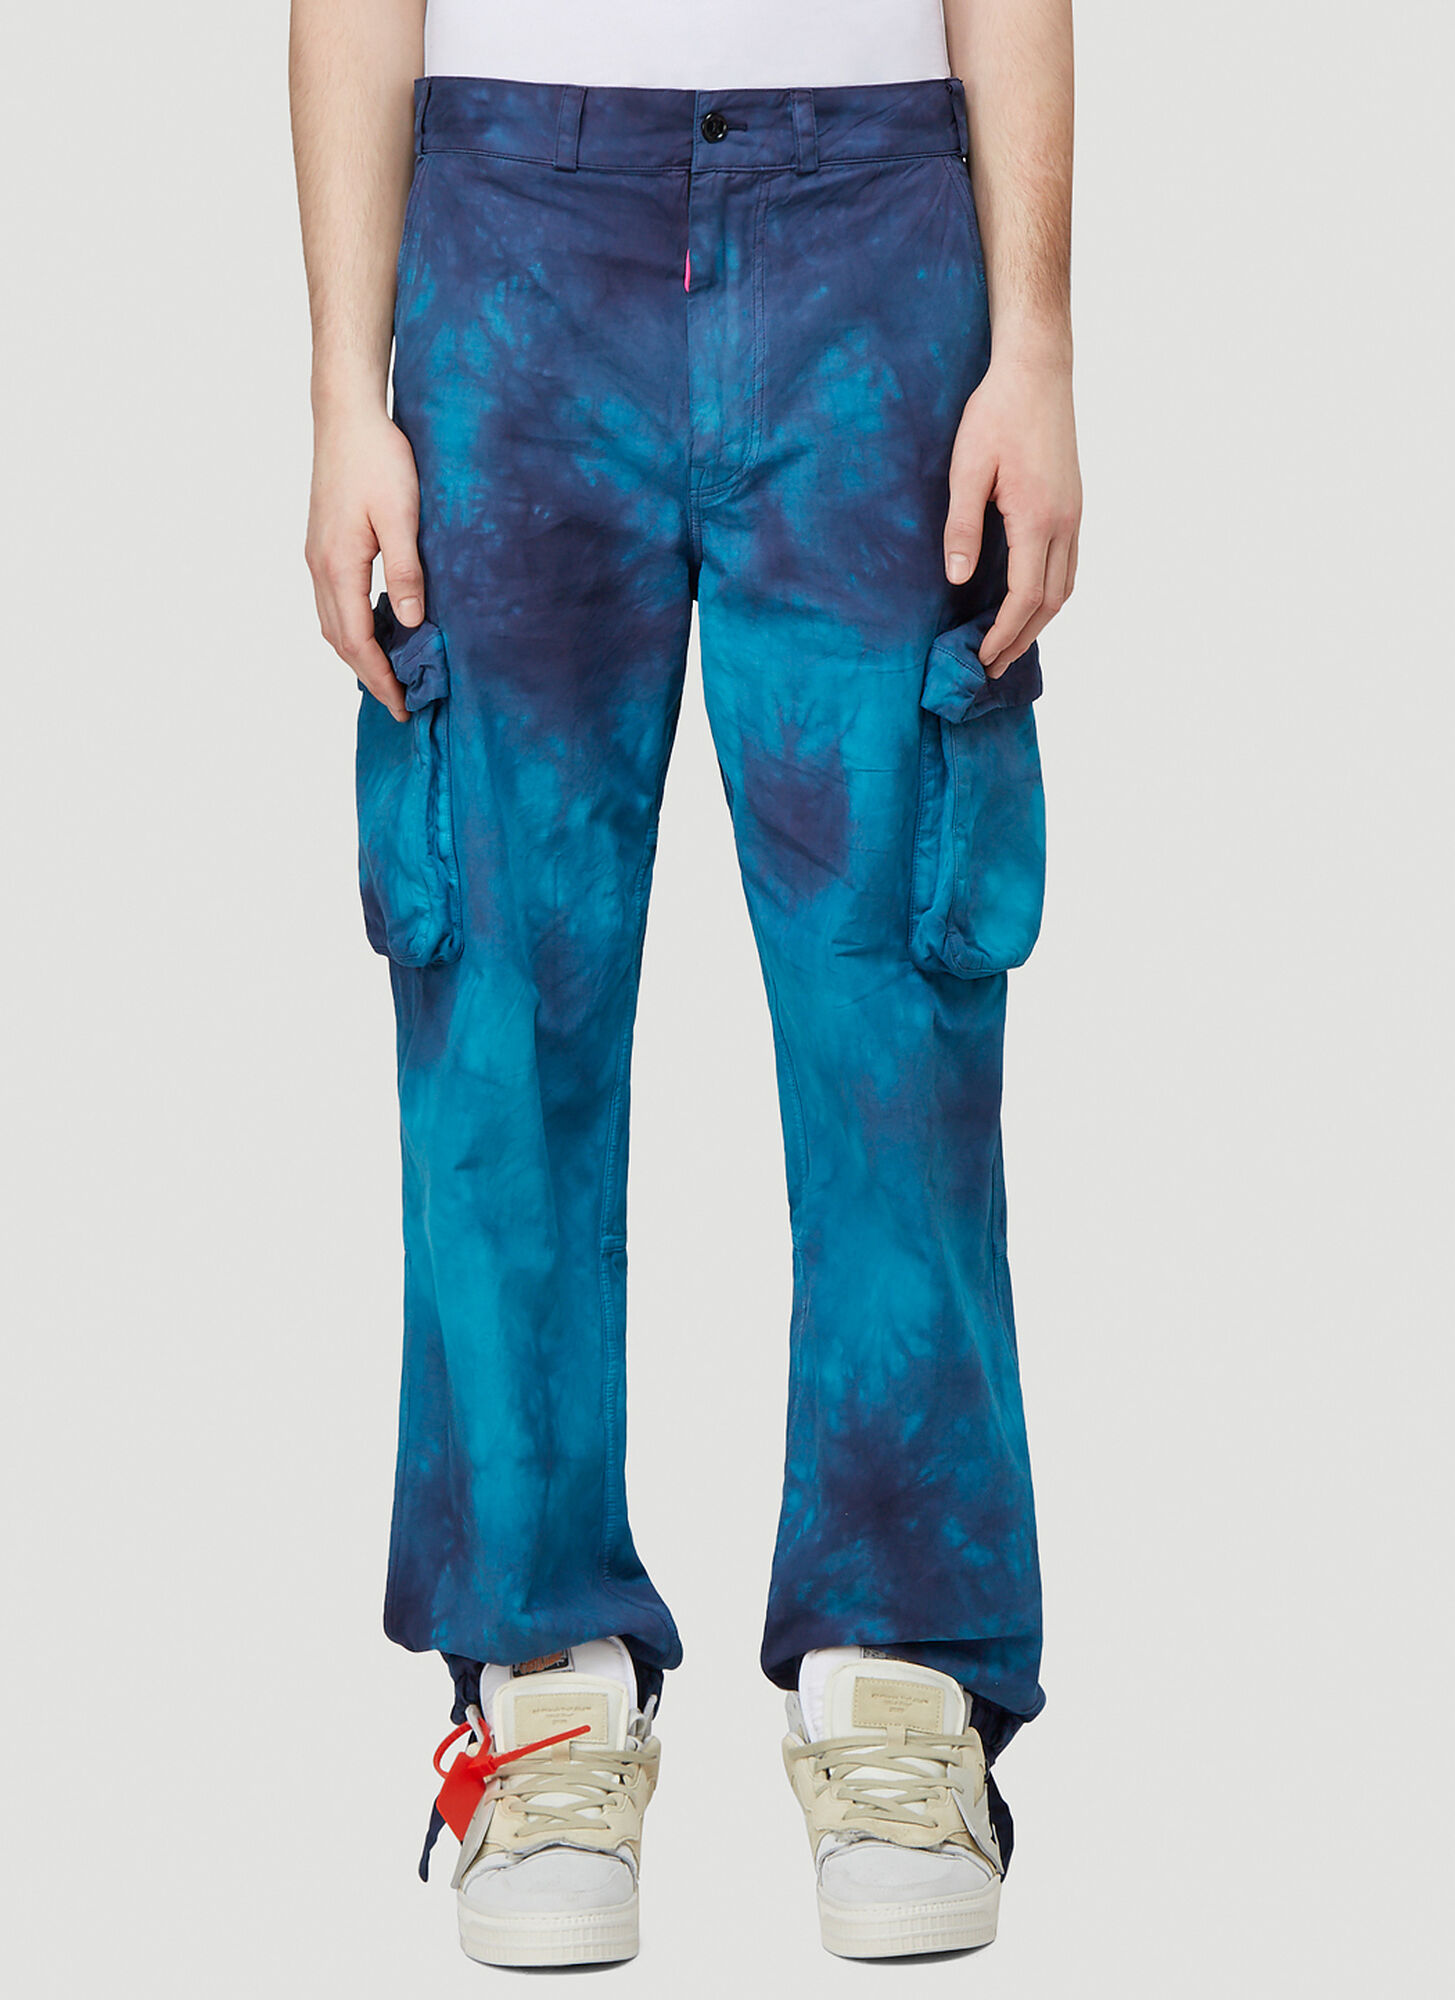 Off-White Tie-Dye Cargo Pants in Blue size 32 | The Fashionisto